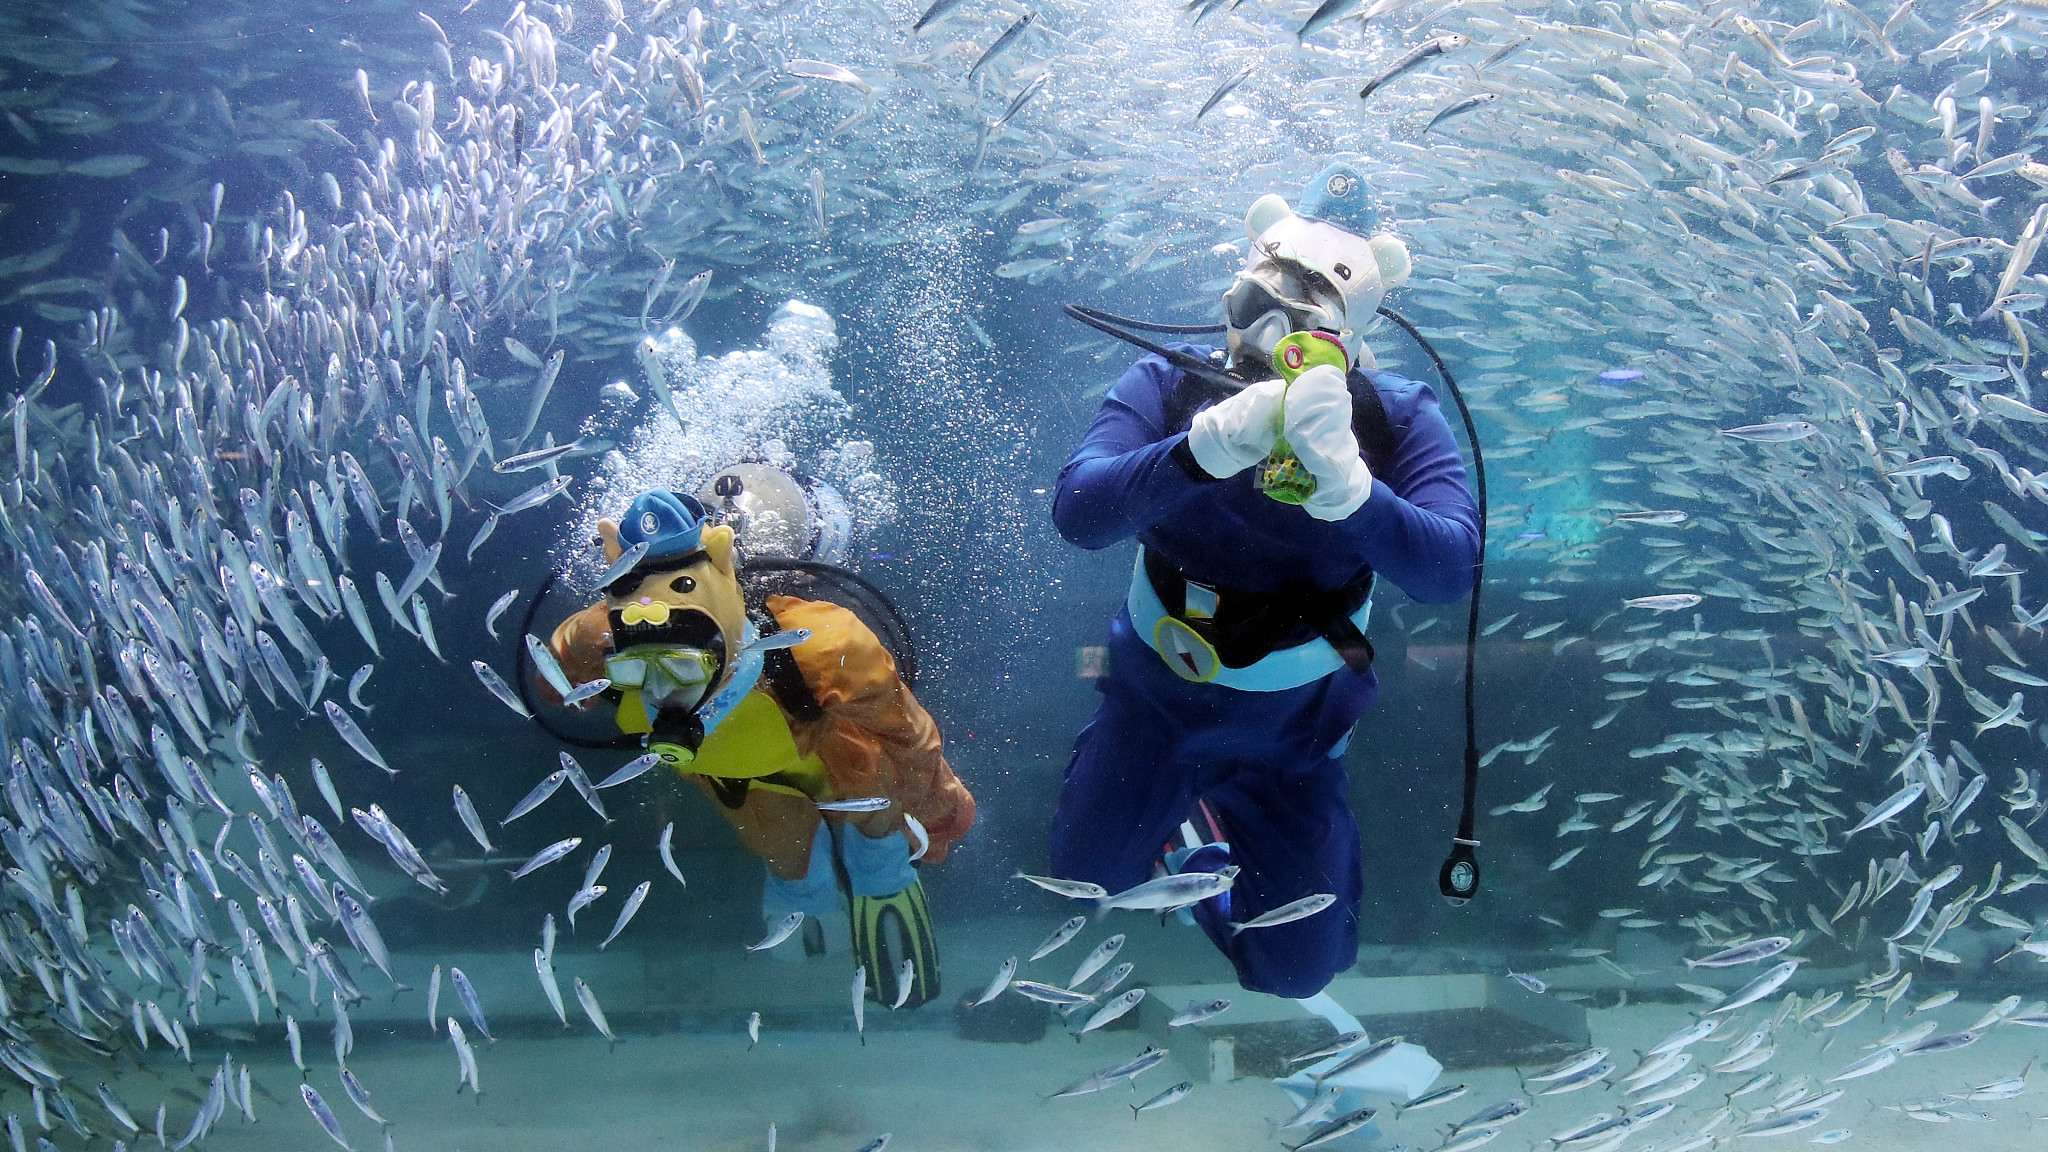 Costumed divers surrounded by sardines in a S. Korean aquarium